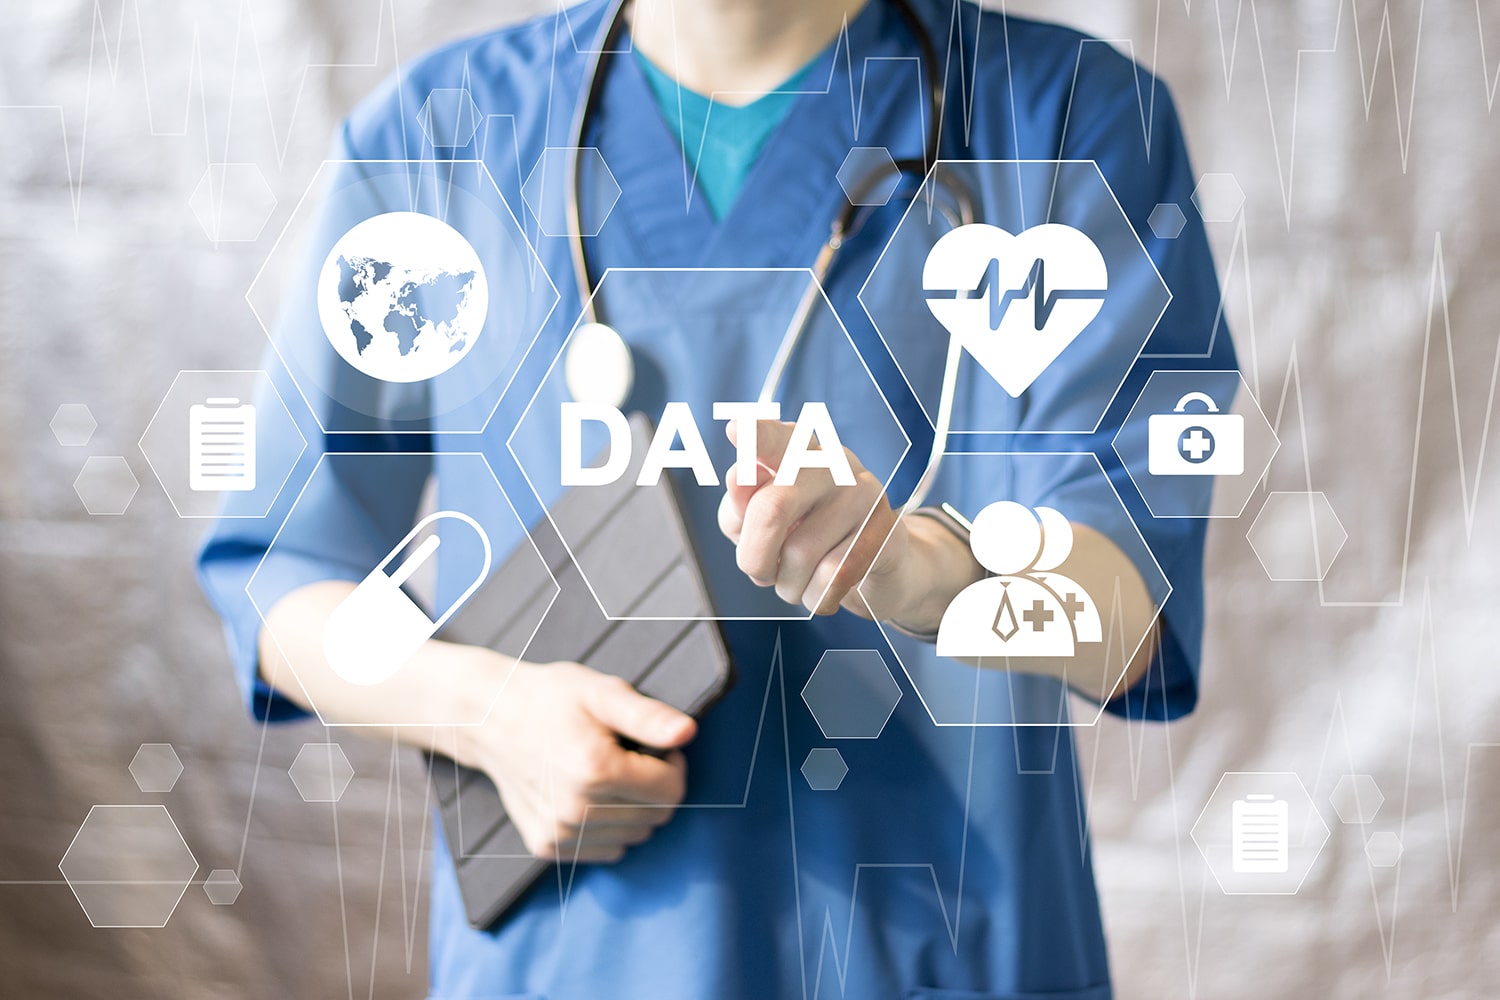 How Does Big Data Help Healthcare